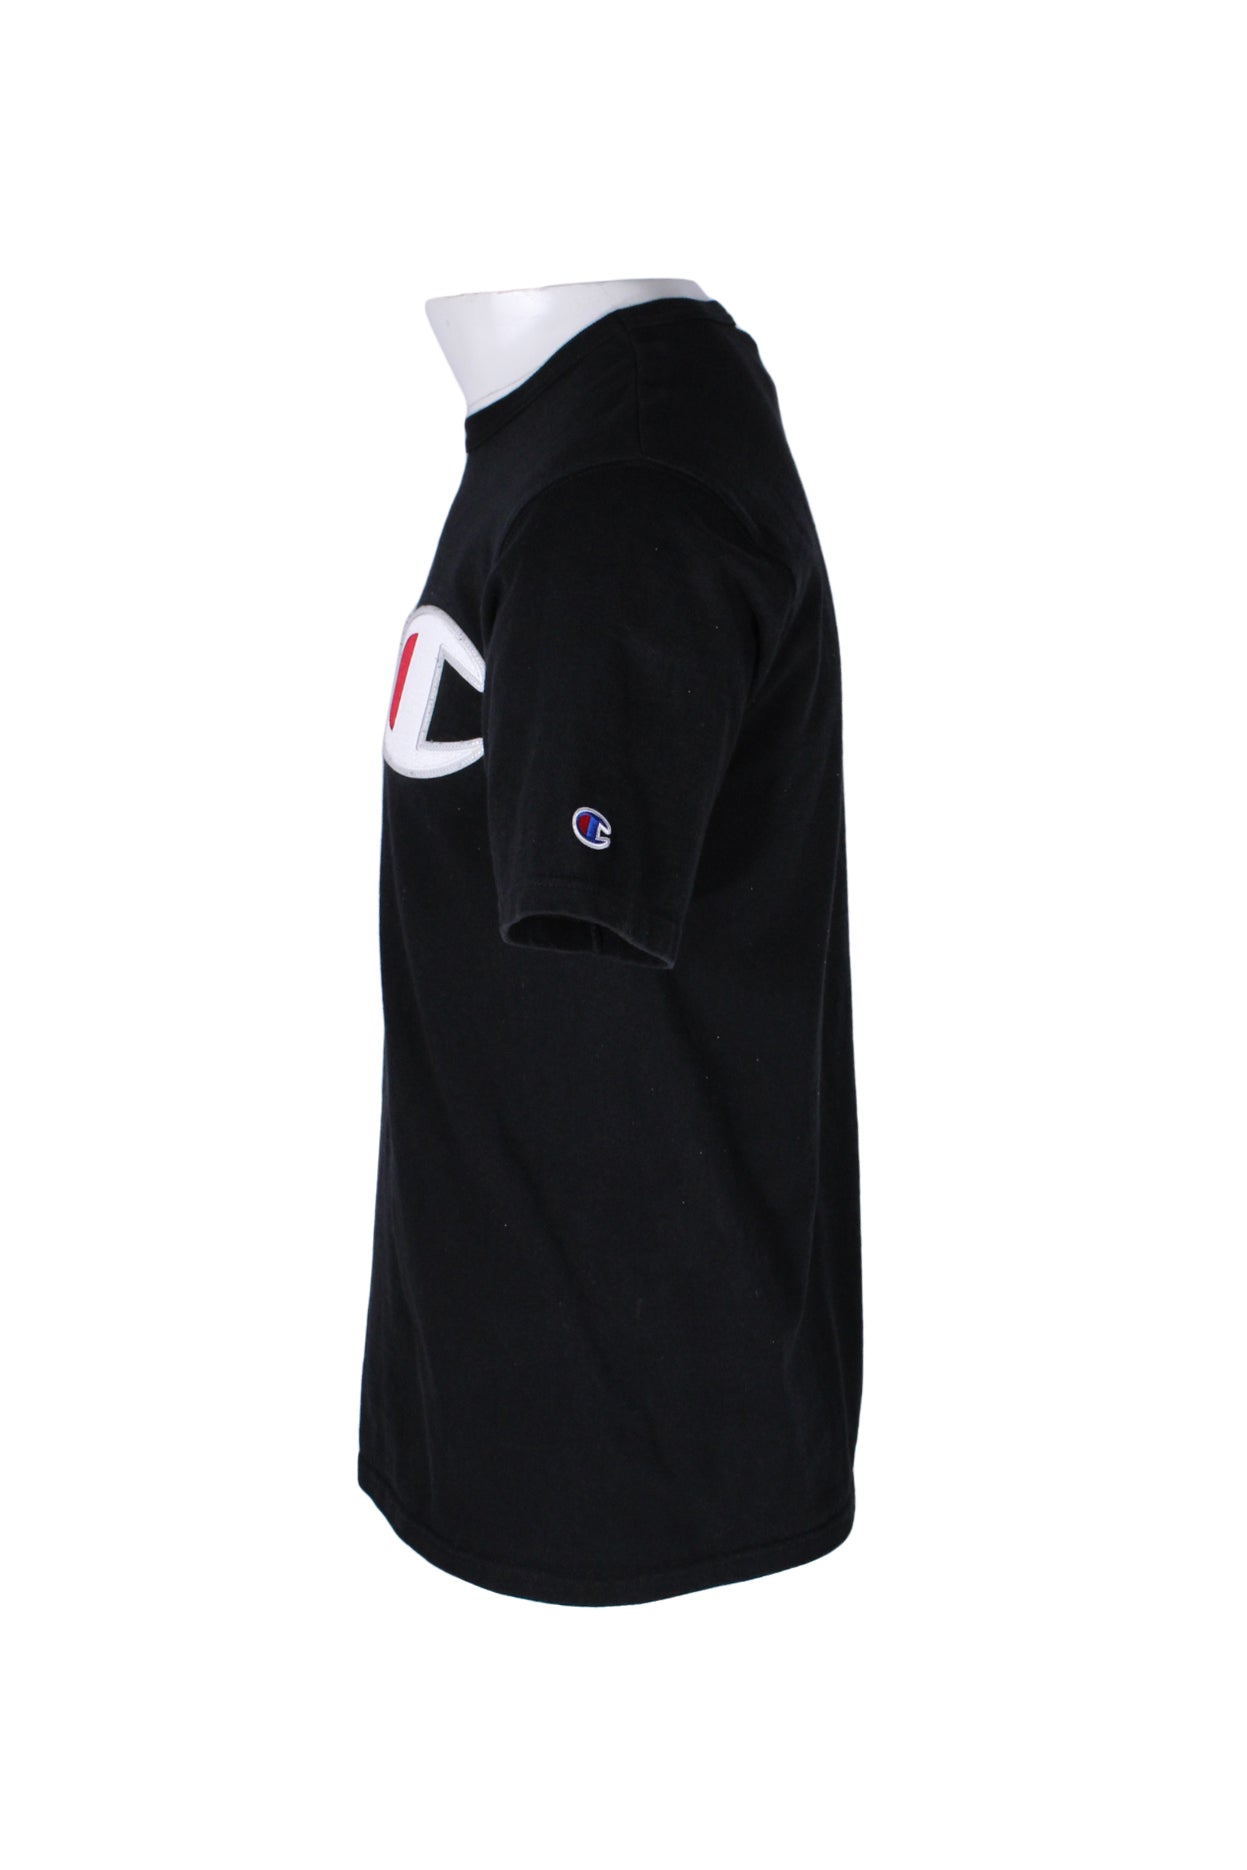 side angle champion black short sleeve t-shirt on masculine mannequin torso featuring oversized white/red embroidered logo patch at left chest and blue/red/white embroidered logo patch at left sleeve.